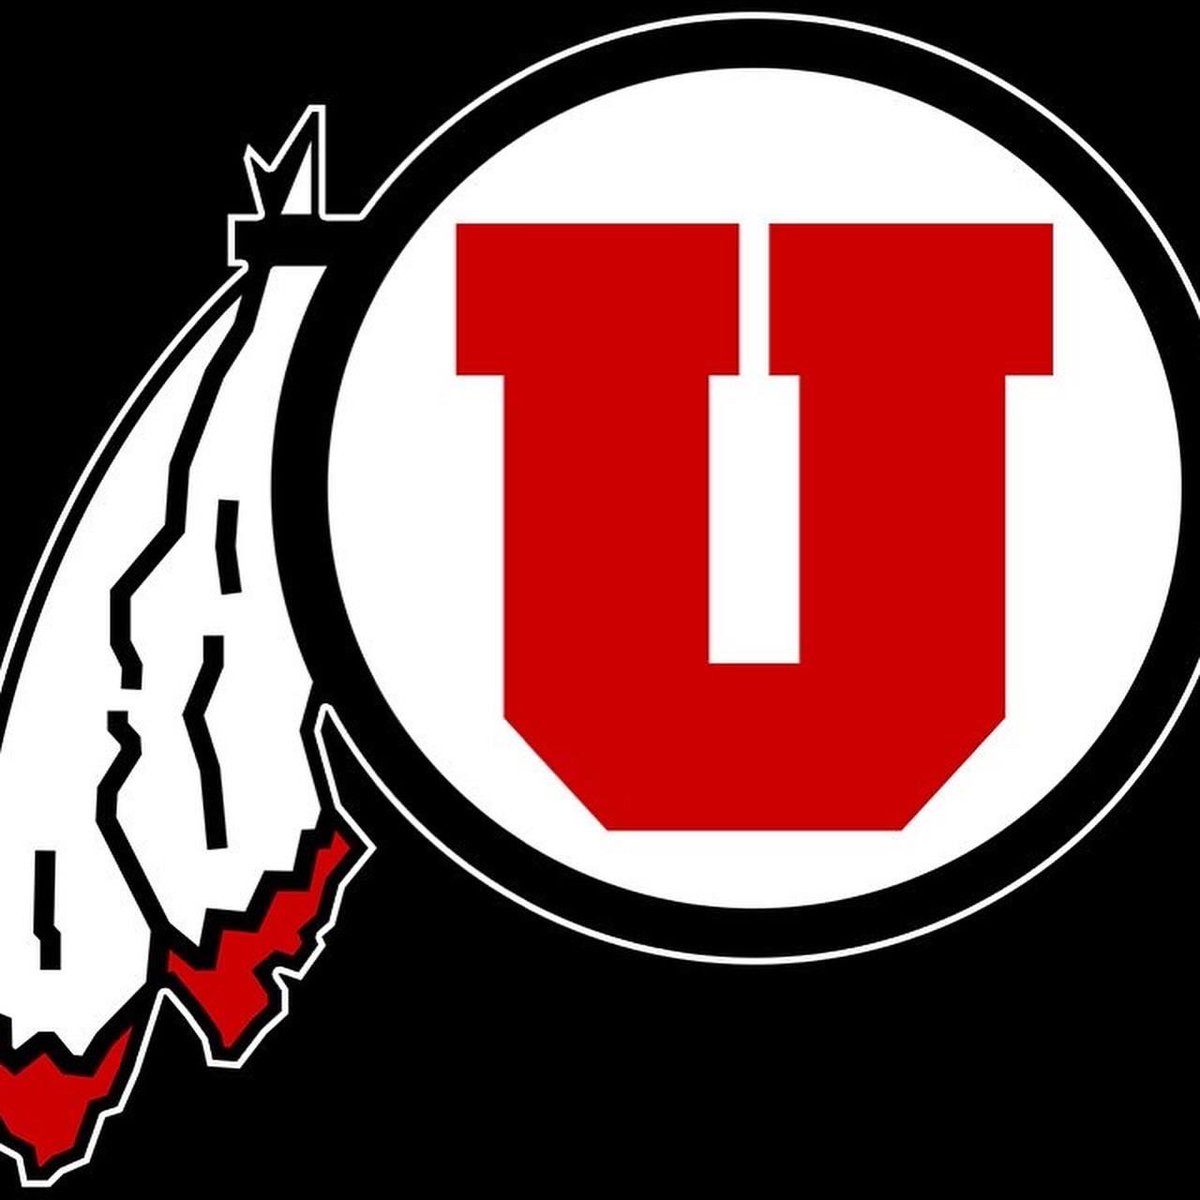 All glory praised to you God. Humbly blessed to receive an offer from, University of Utah @CoachPowell99 @Utah_Football @MDFootball #AG2G #UTES